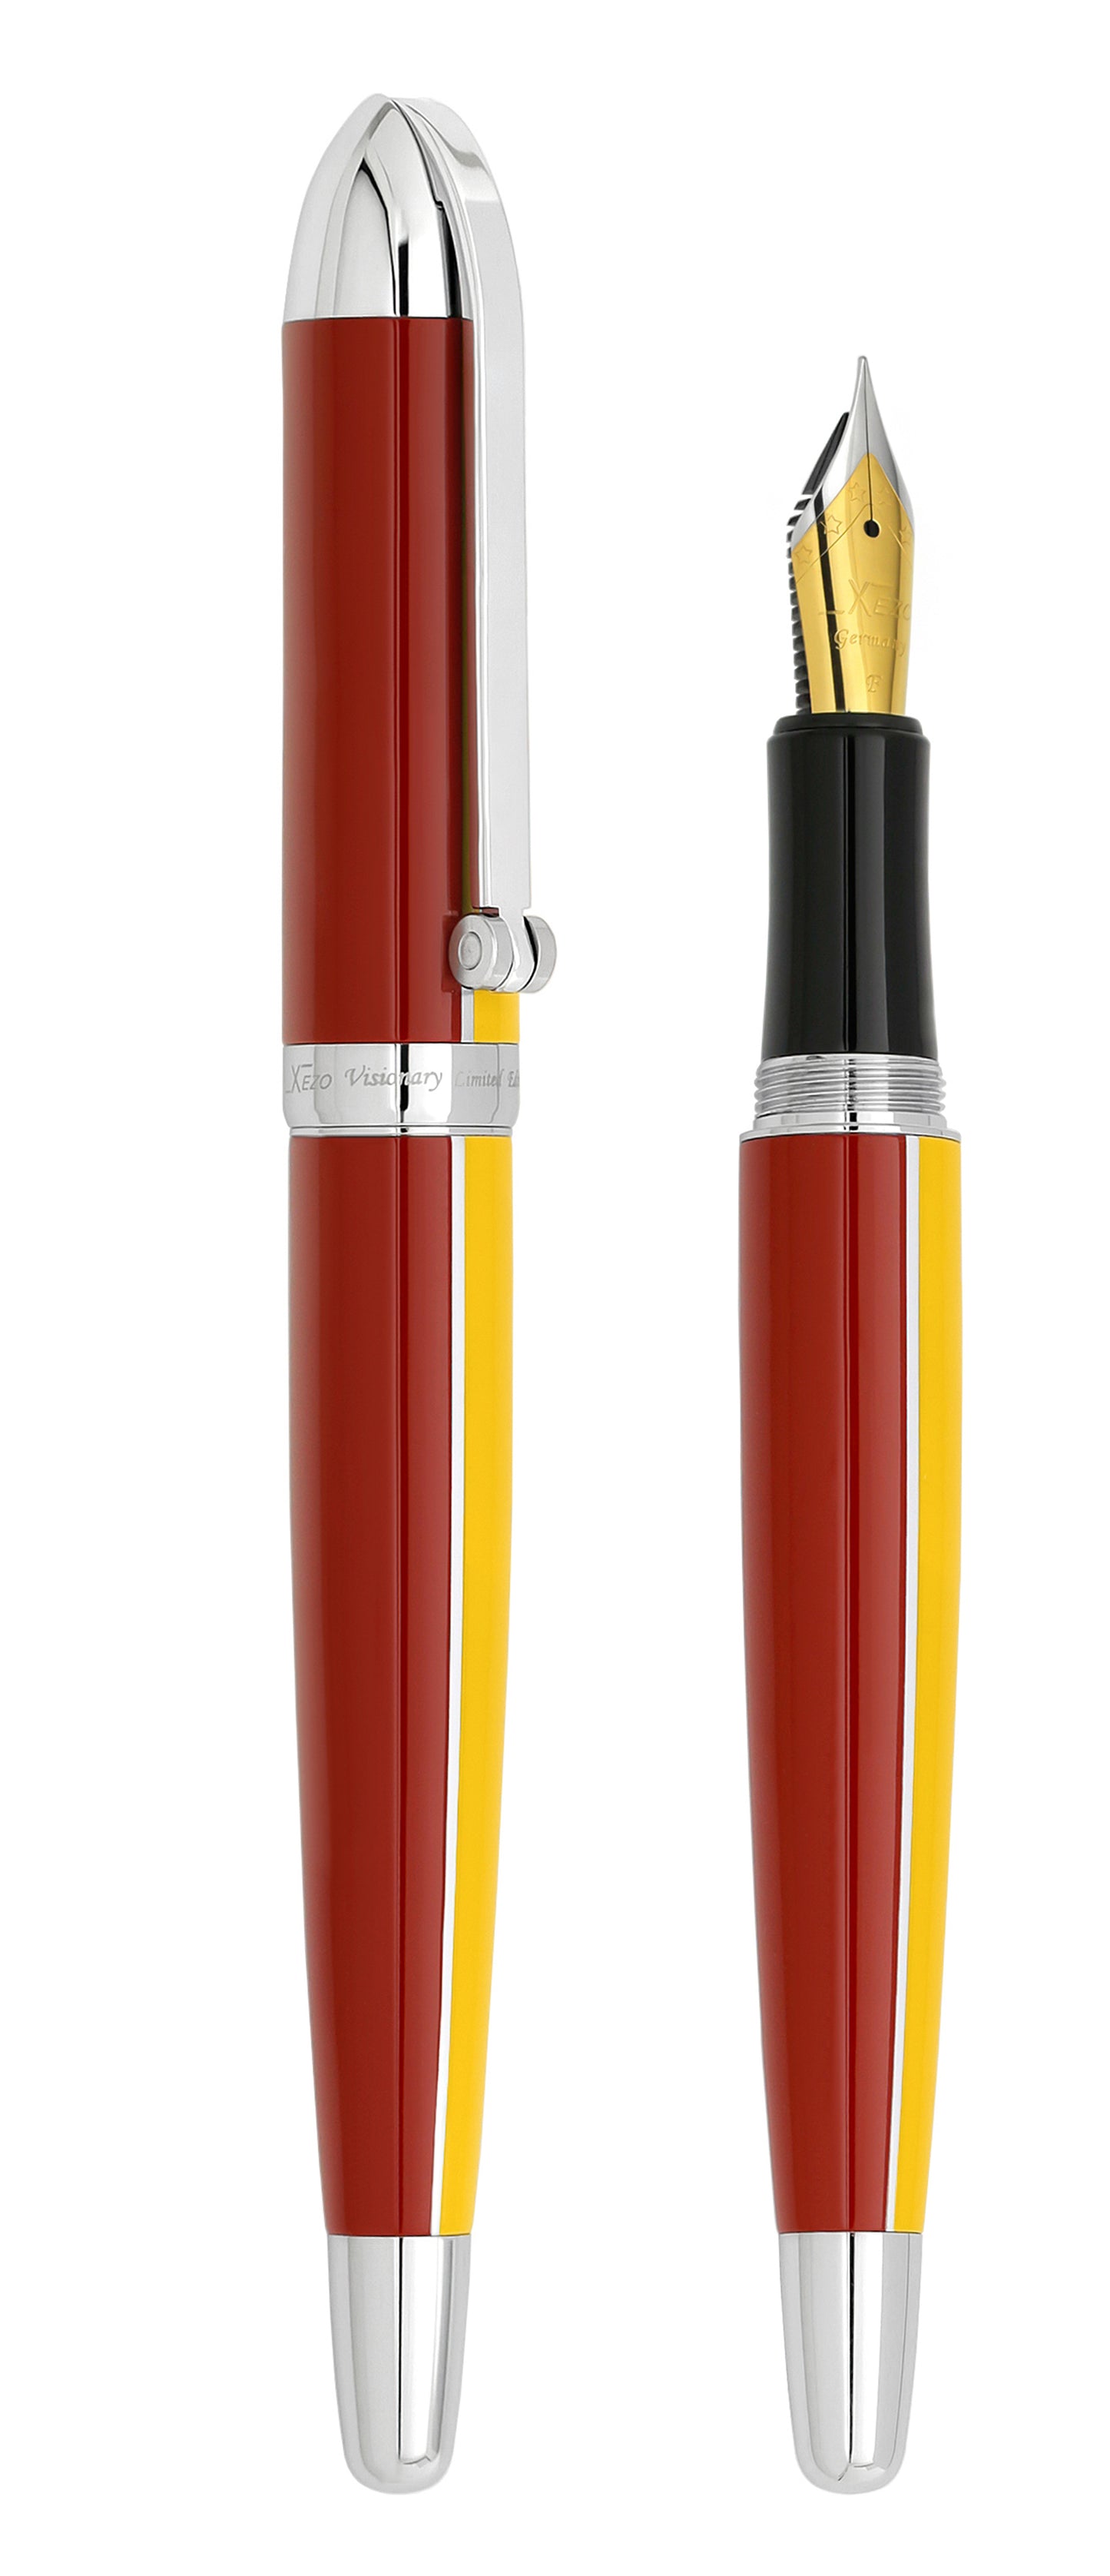 Xezo - Vertical view of two Visionary Aspen/Red F Fountain pens; the one on the left is capped, and the one on the right is uncapped